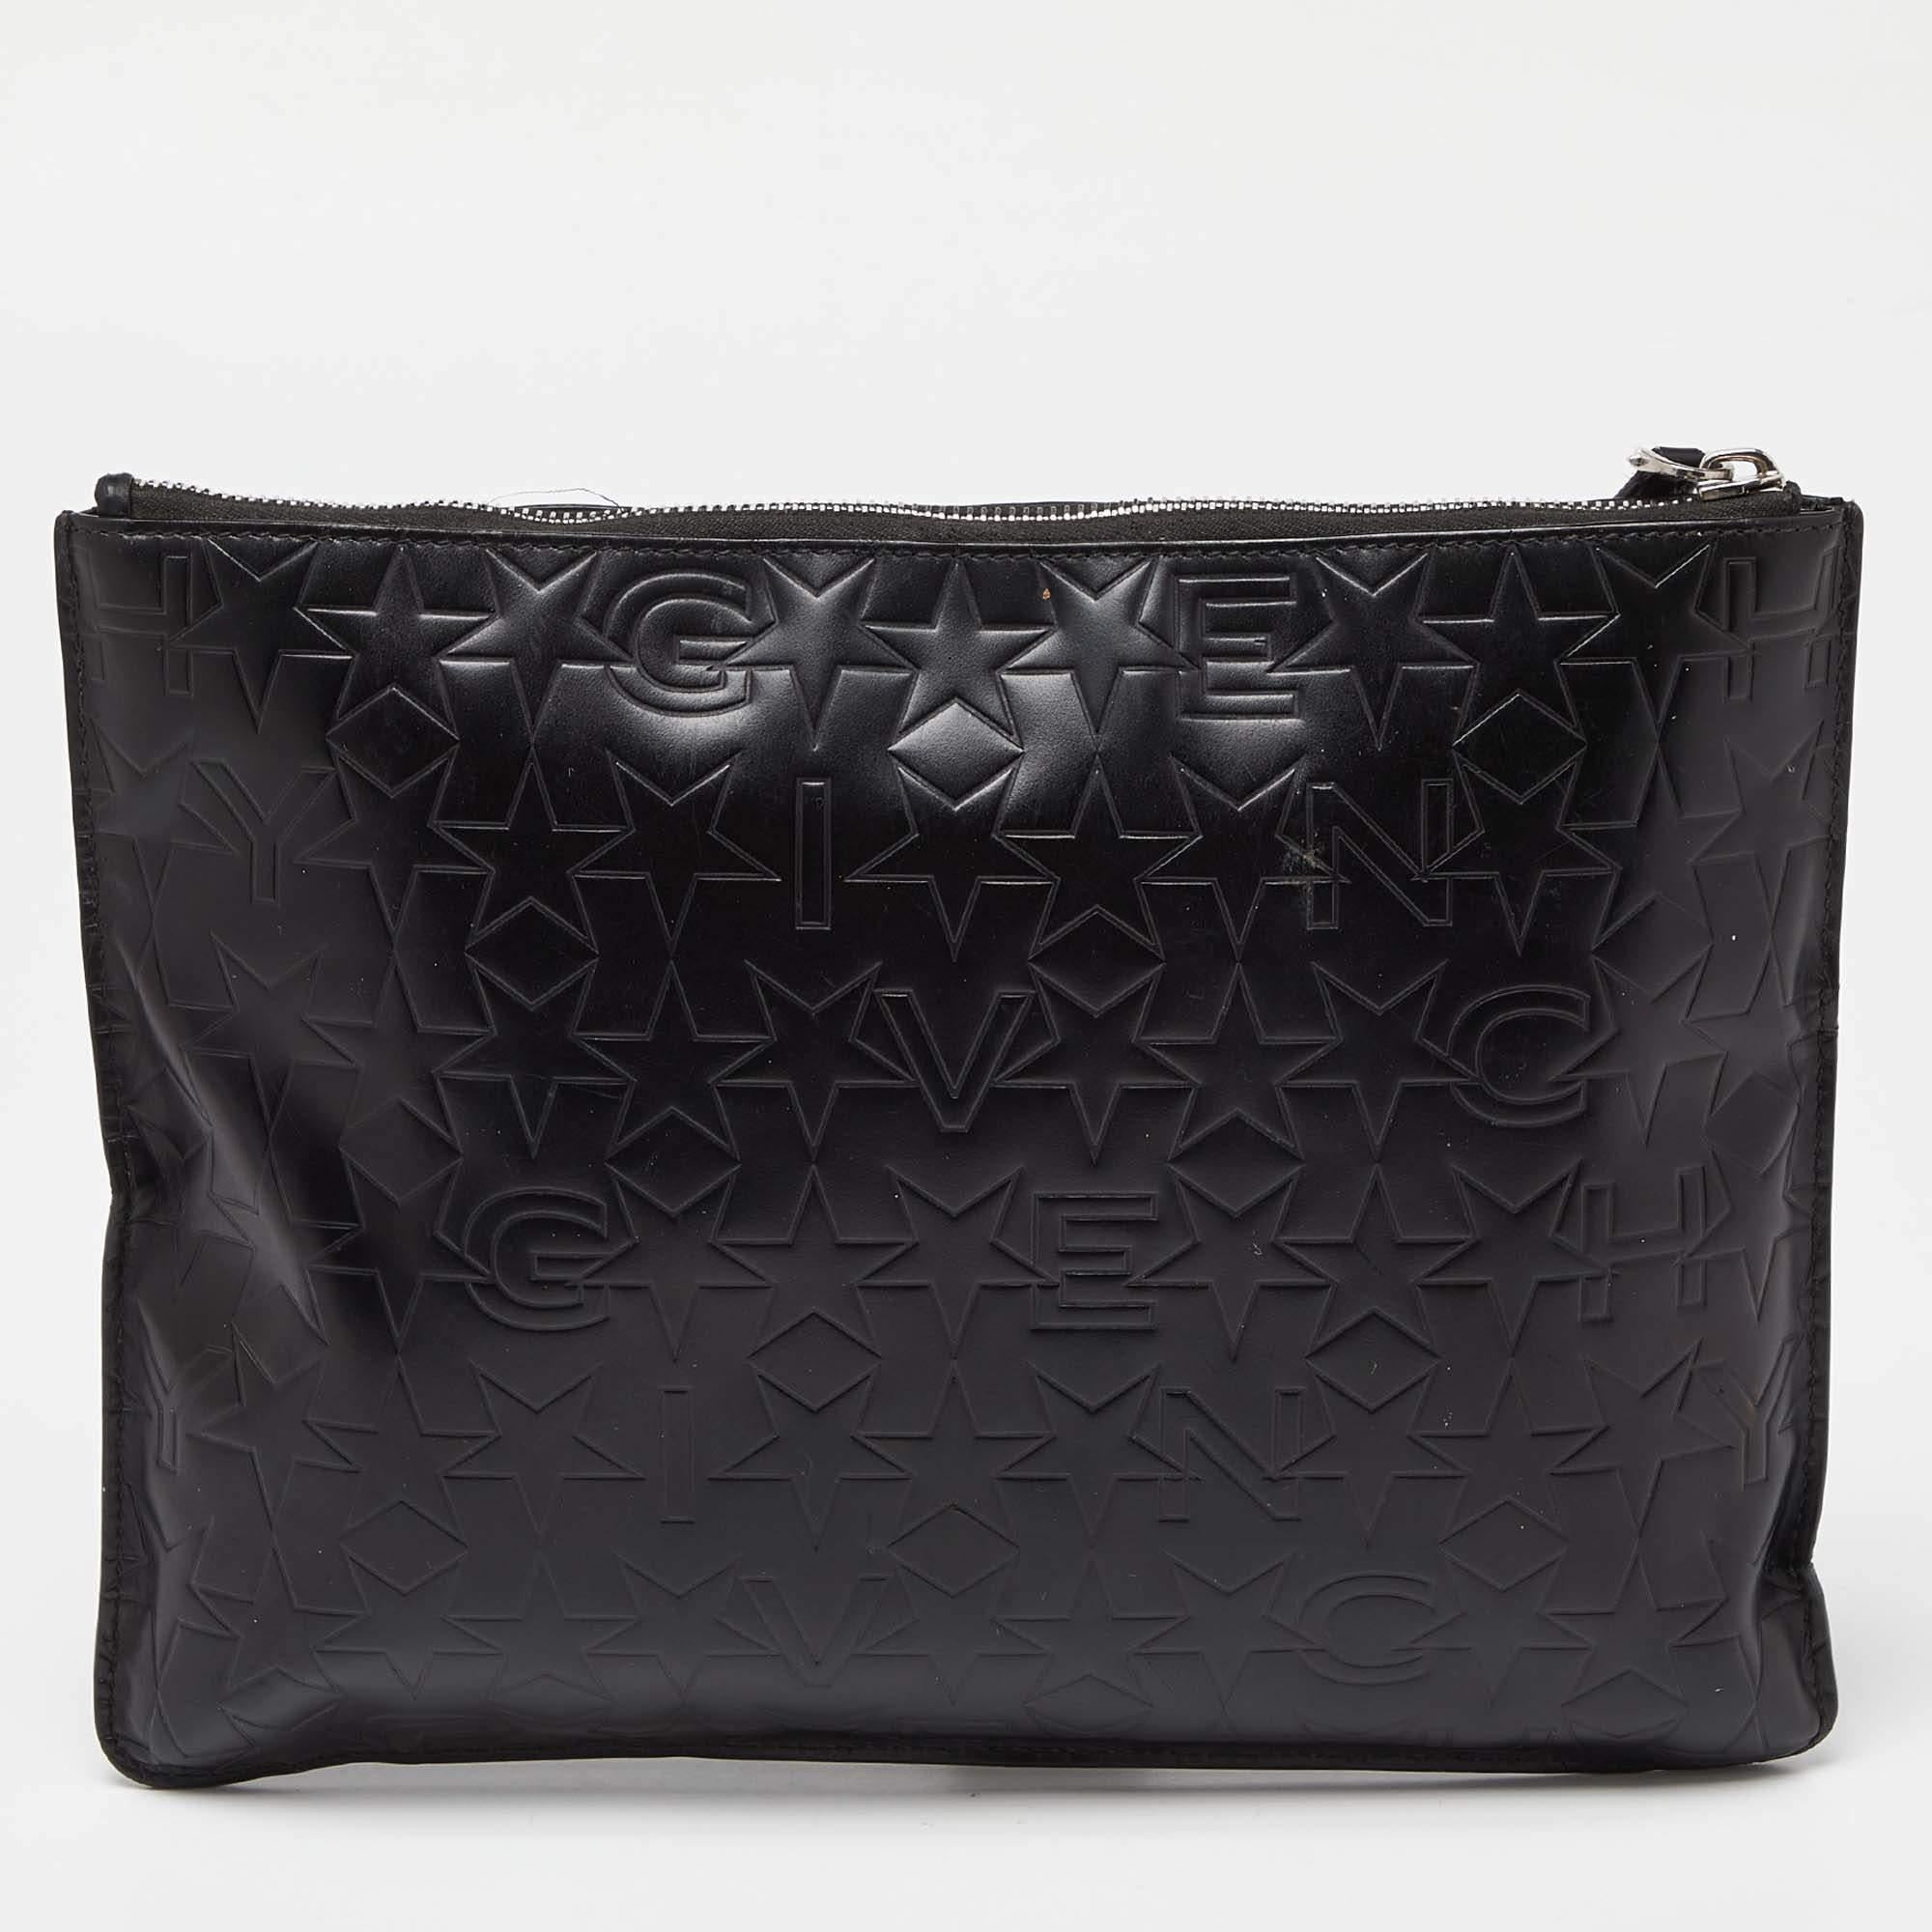 Givenchy Black Star Embossed Leather Zip Clutch For Sale 6